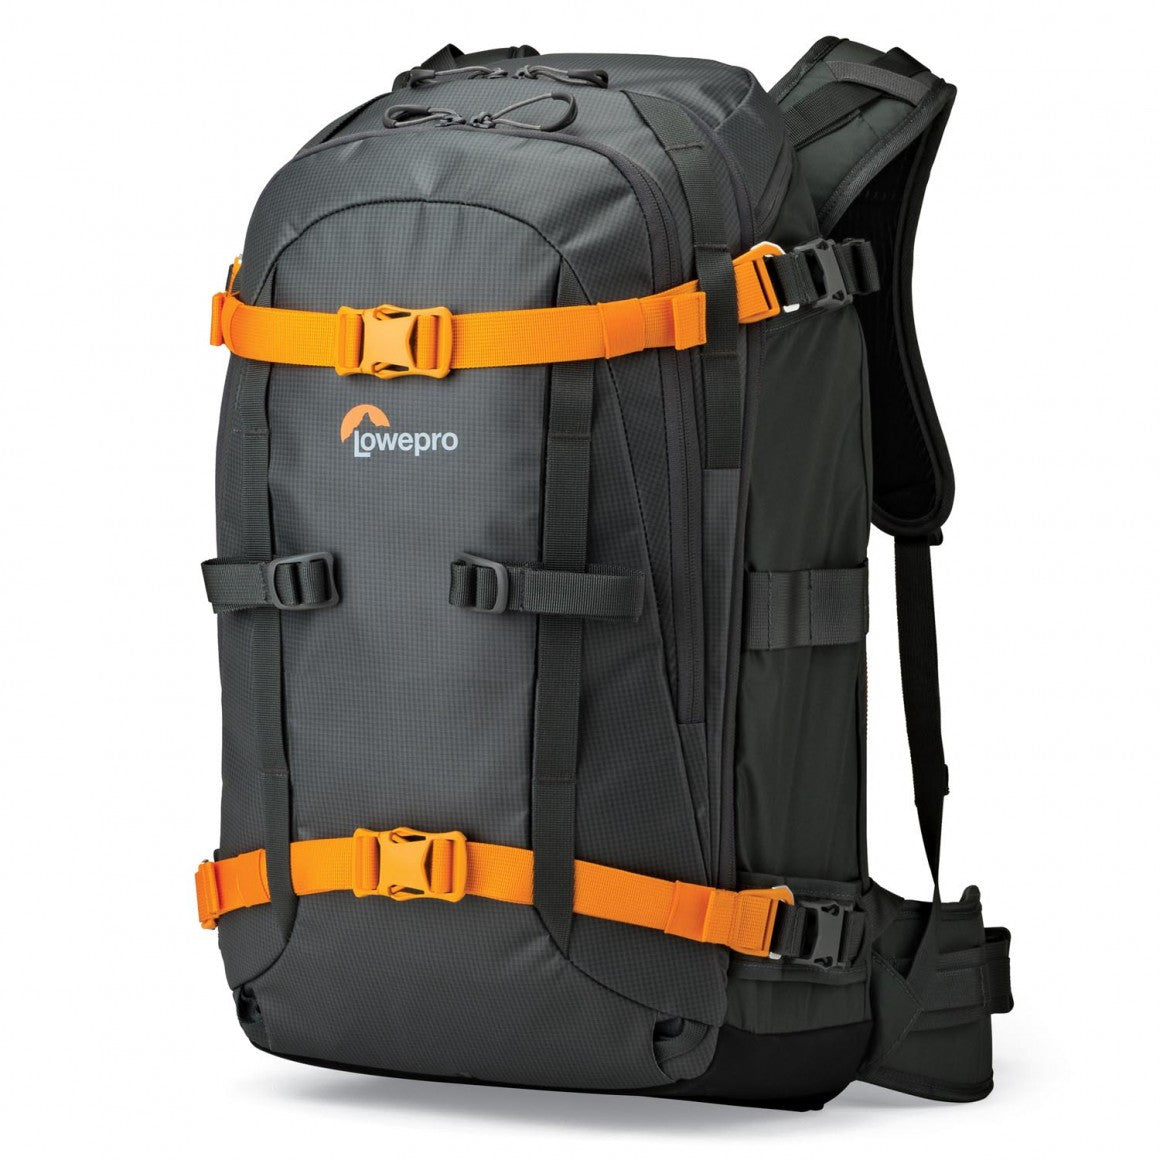 Lowepro Whistler 350AW Backpack (Grey), bags backpacks, Lowepro - Pictureline  - 2